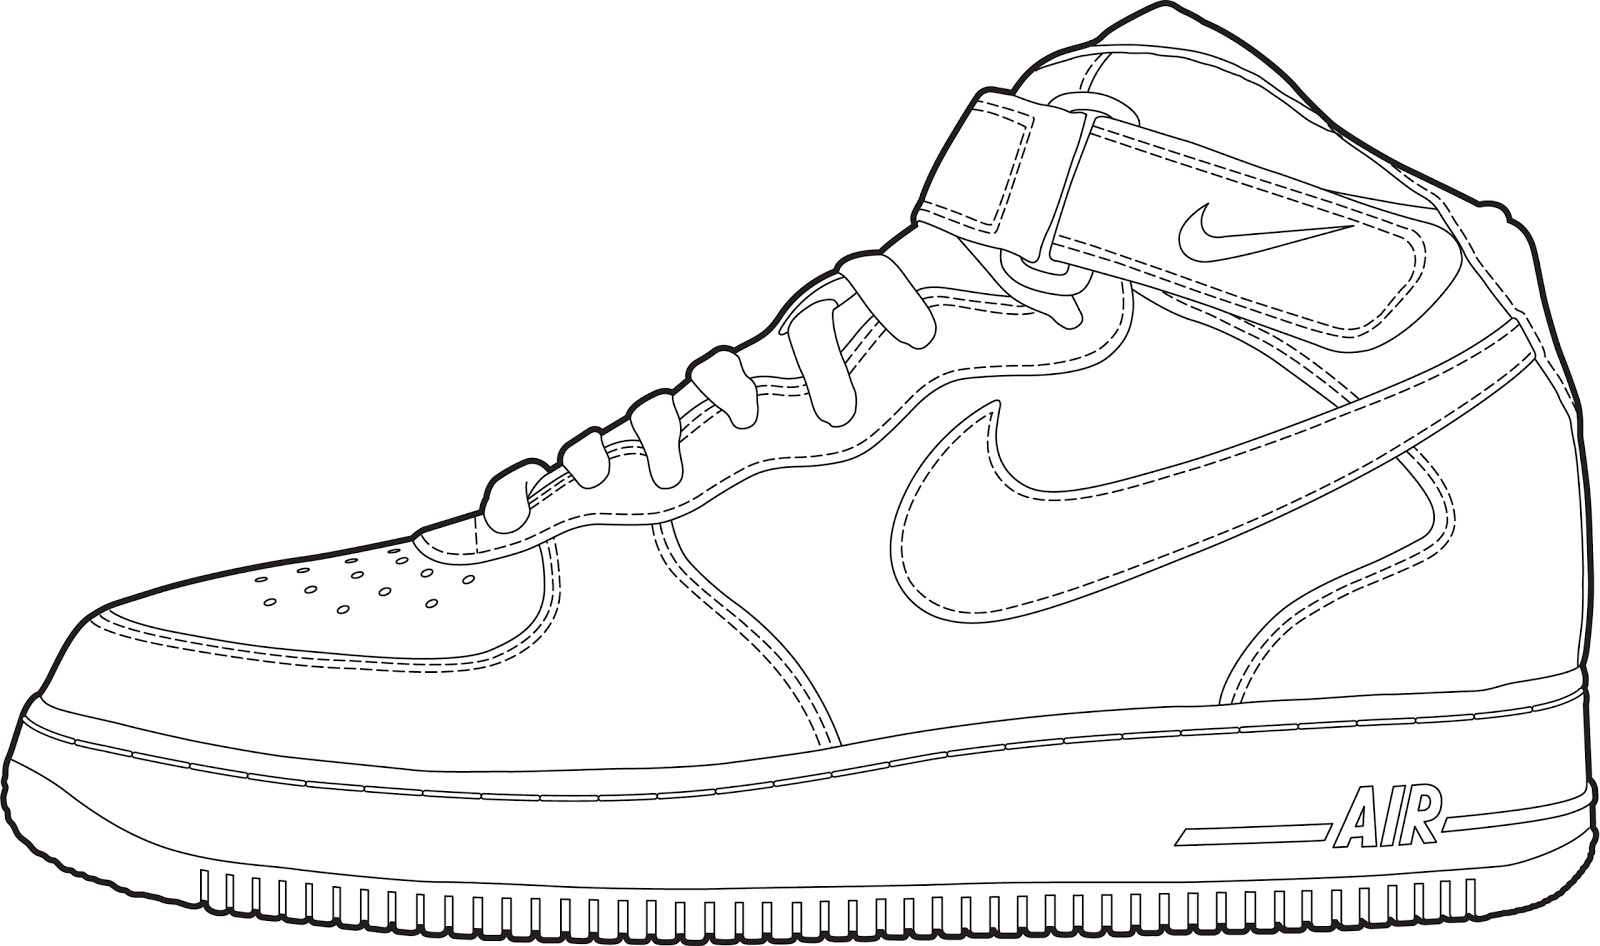 Coloring Pages : Shoe Coloring Page Printable Free Pages Running ...